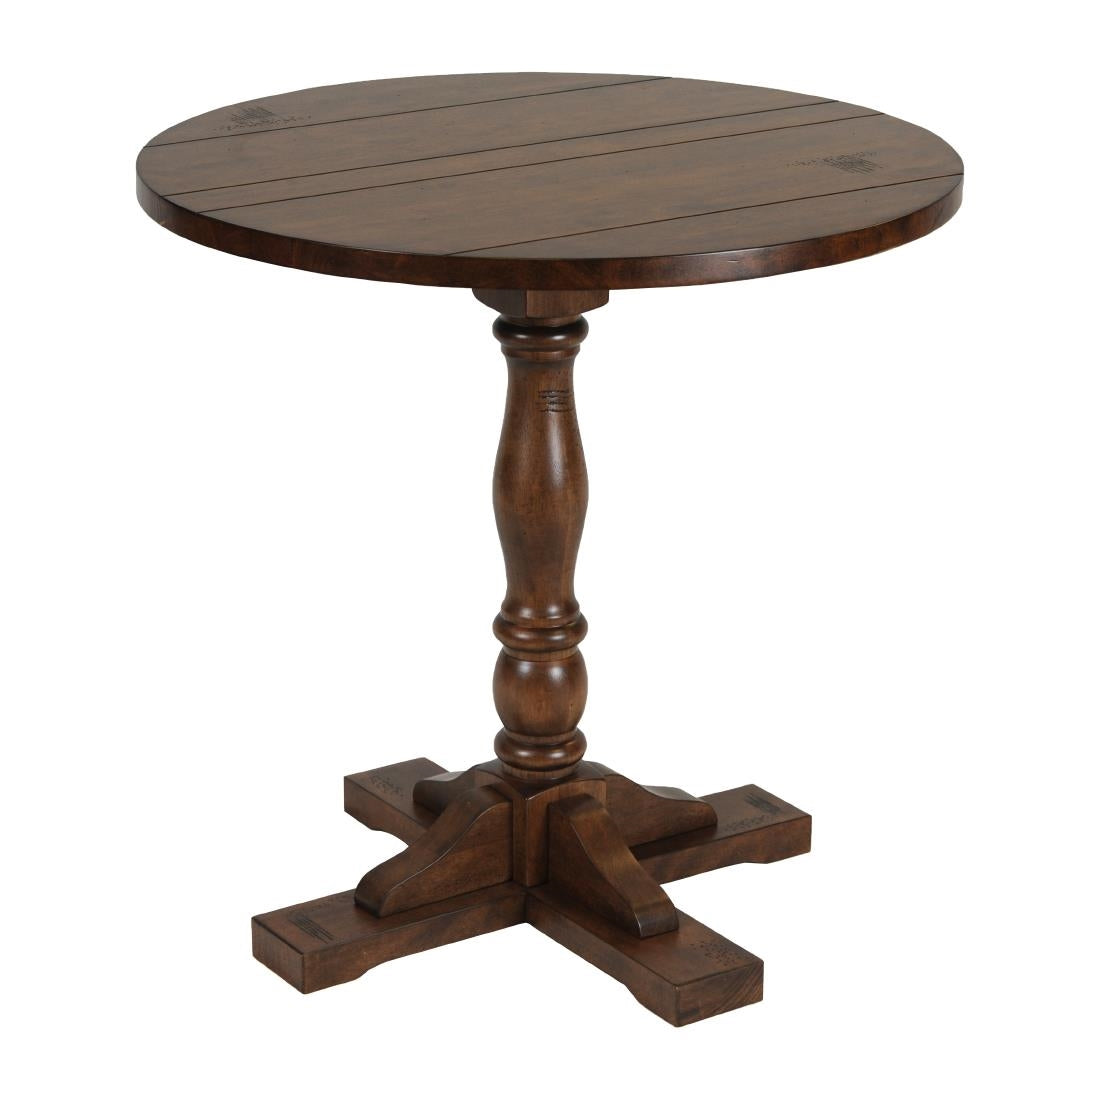 FT509 Oxford Vintage Wood Pedestal Round Table 760mm JD Catering Equipment Solutions Ltd